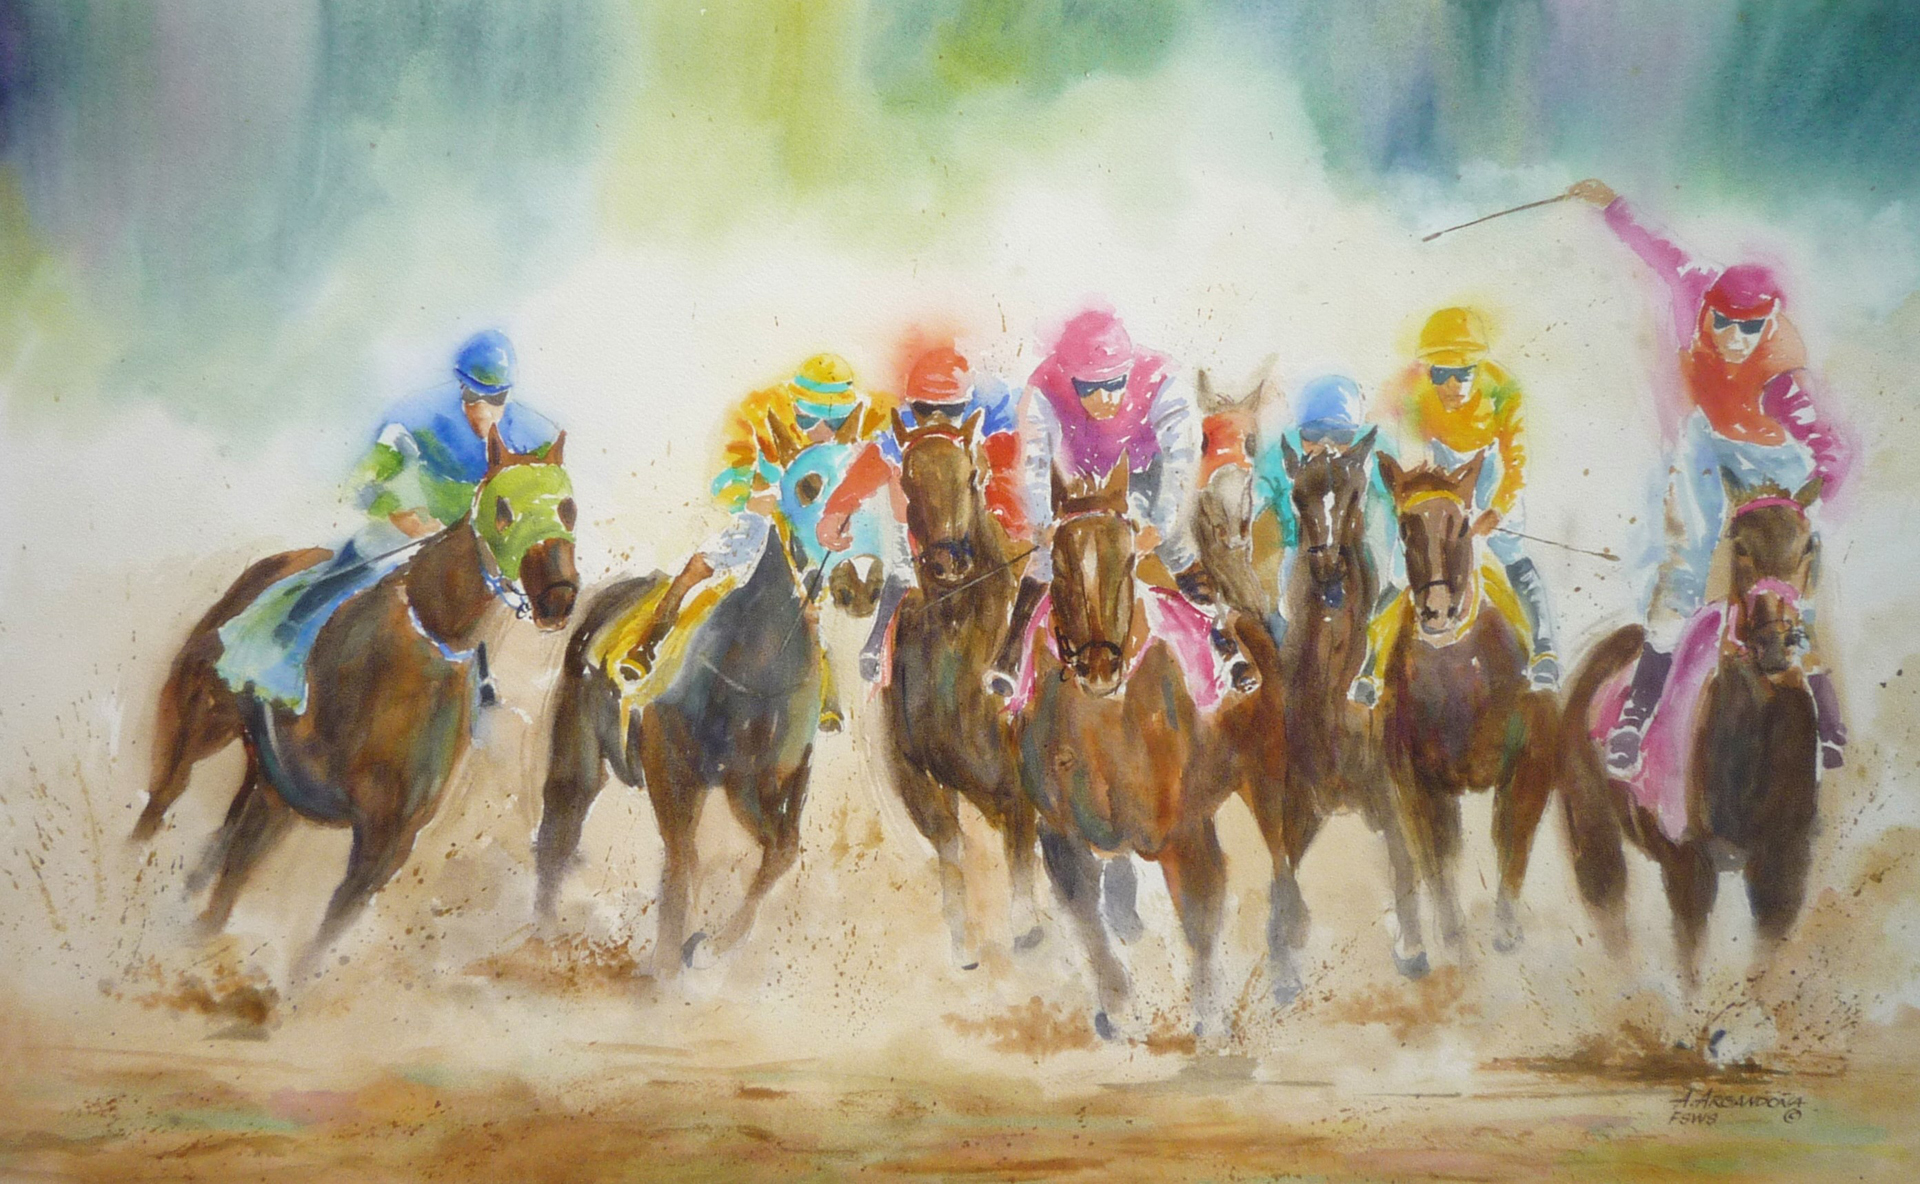 On the Backstretch Original Watercolors by Augusto Argandona